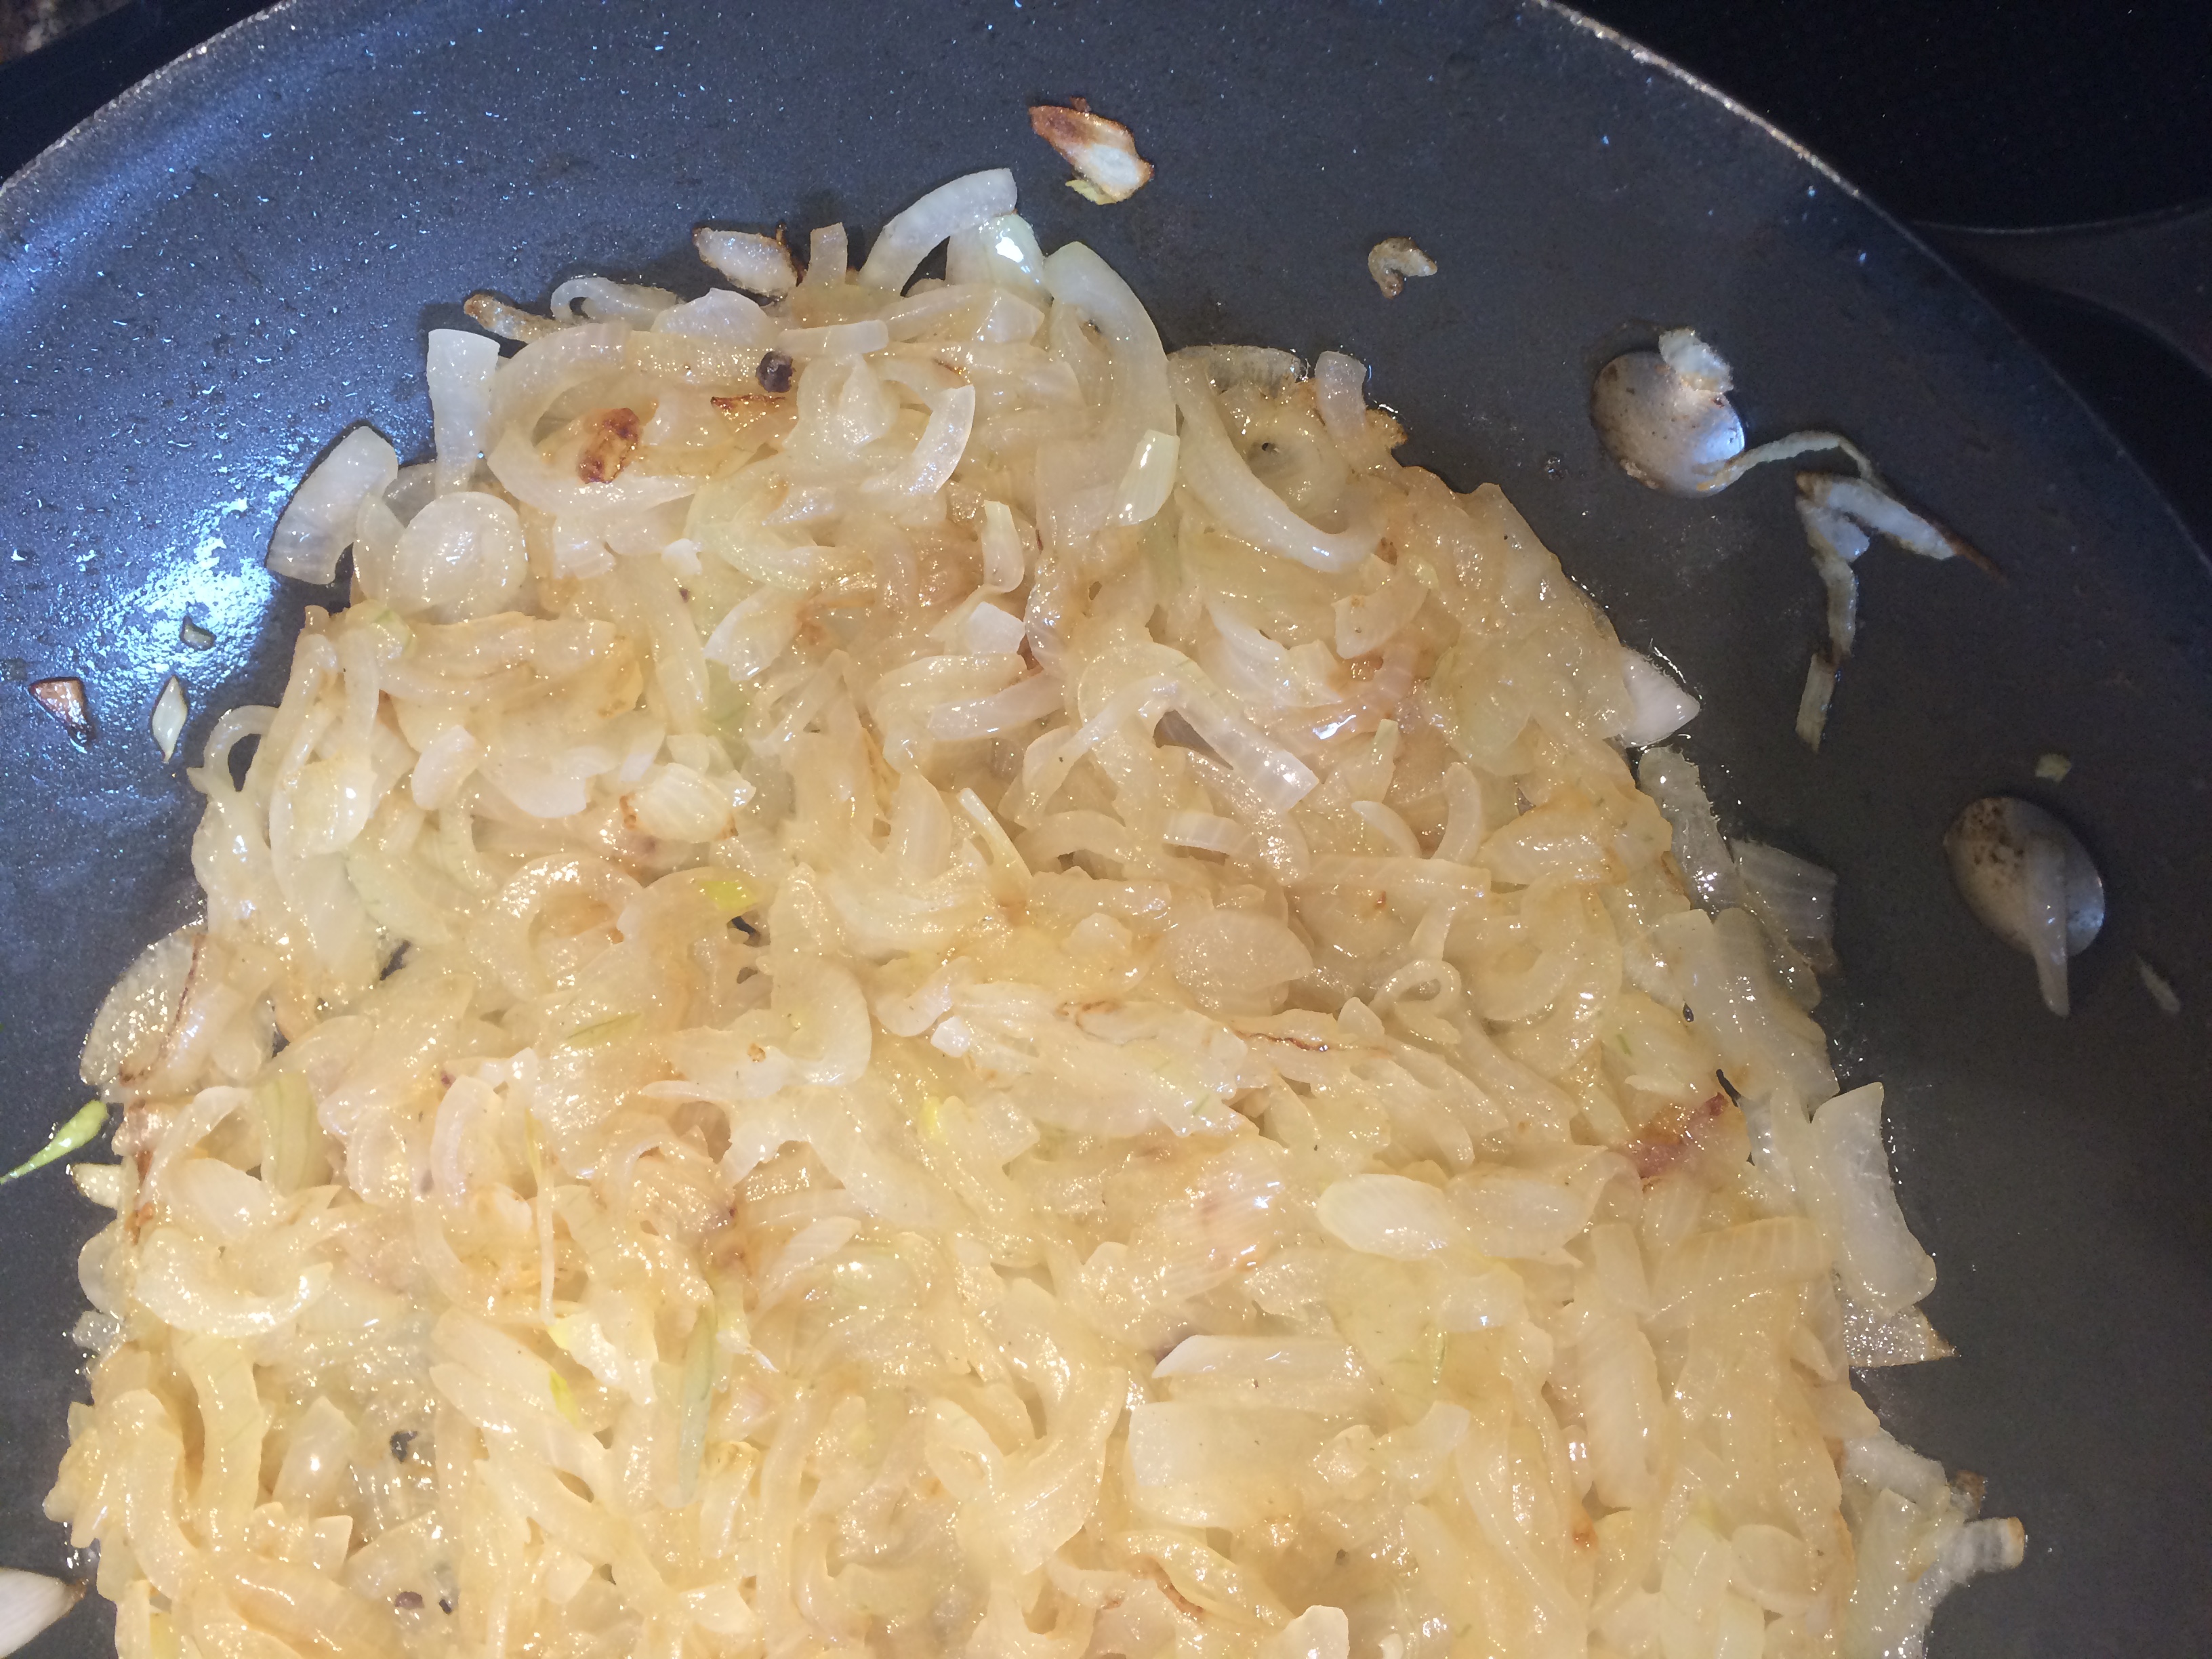 Thinly sliced onions being cooked in a frying pan